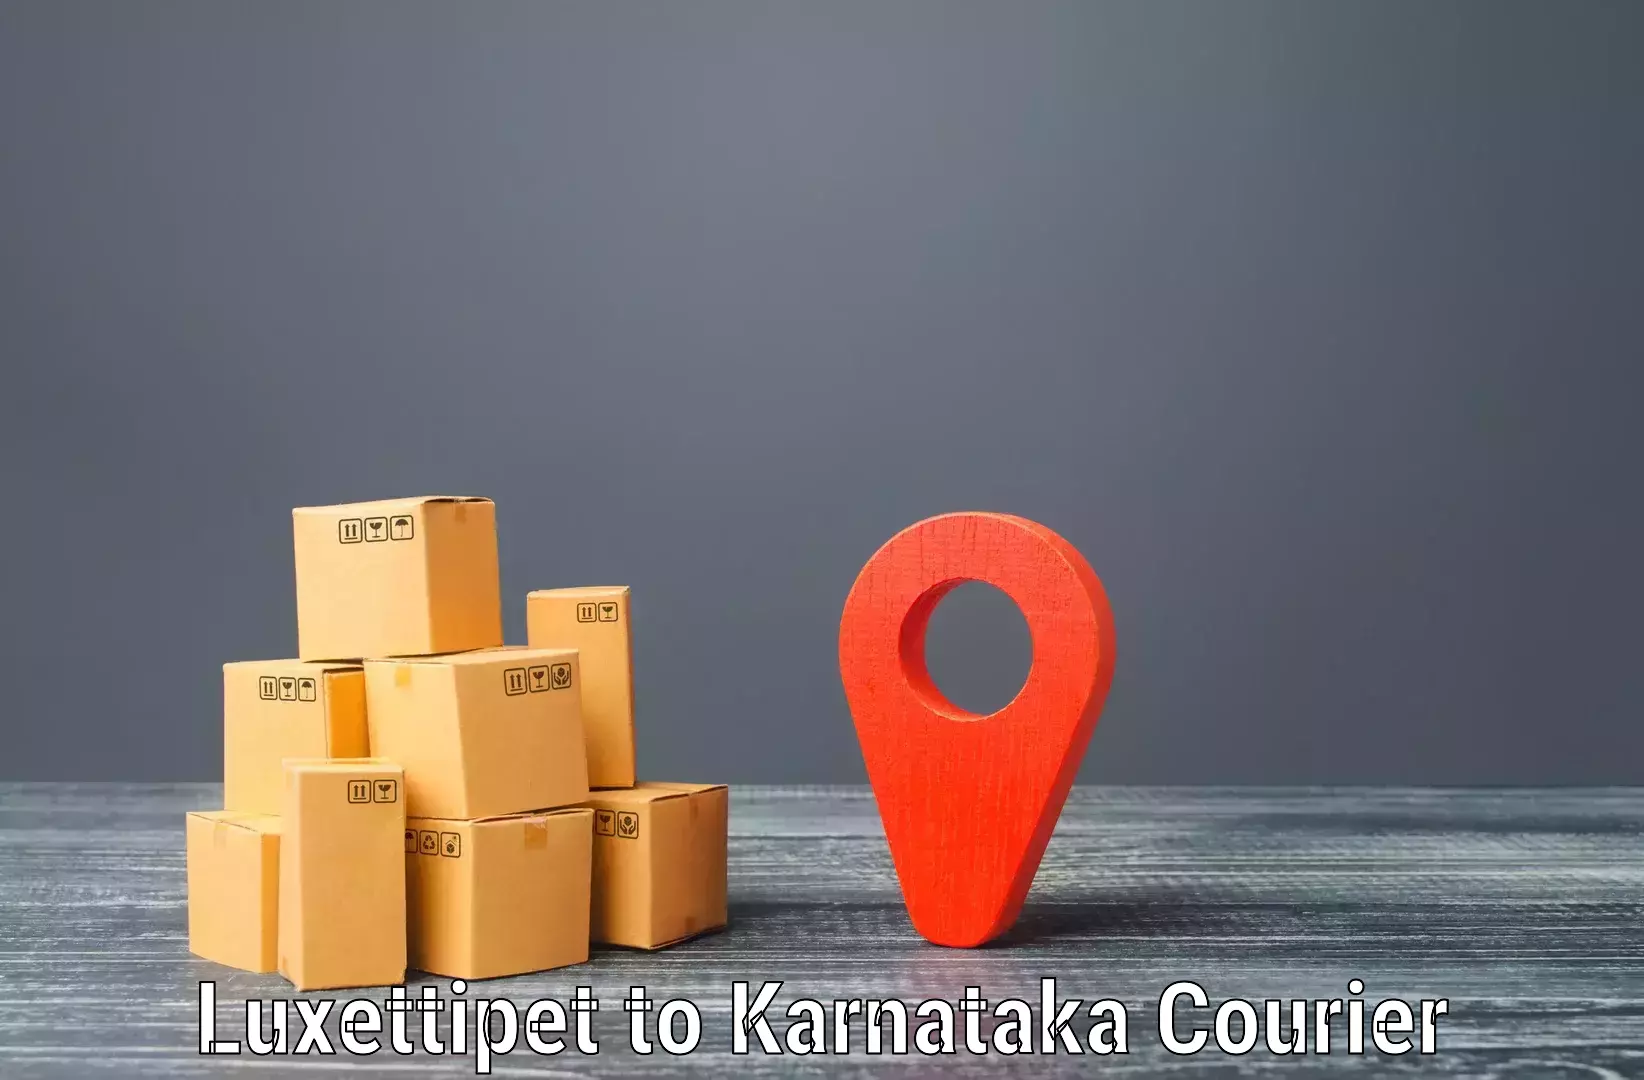 User-friendly courier app Luxettipet to Karnataka